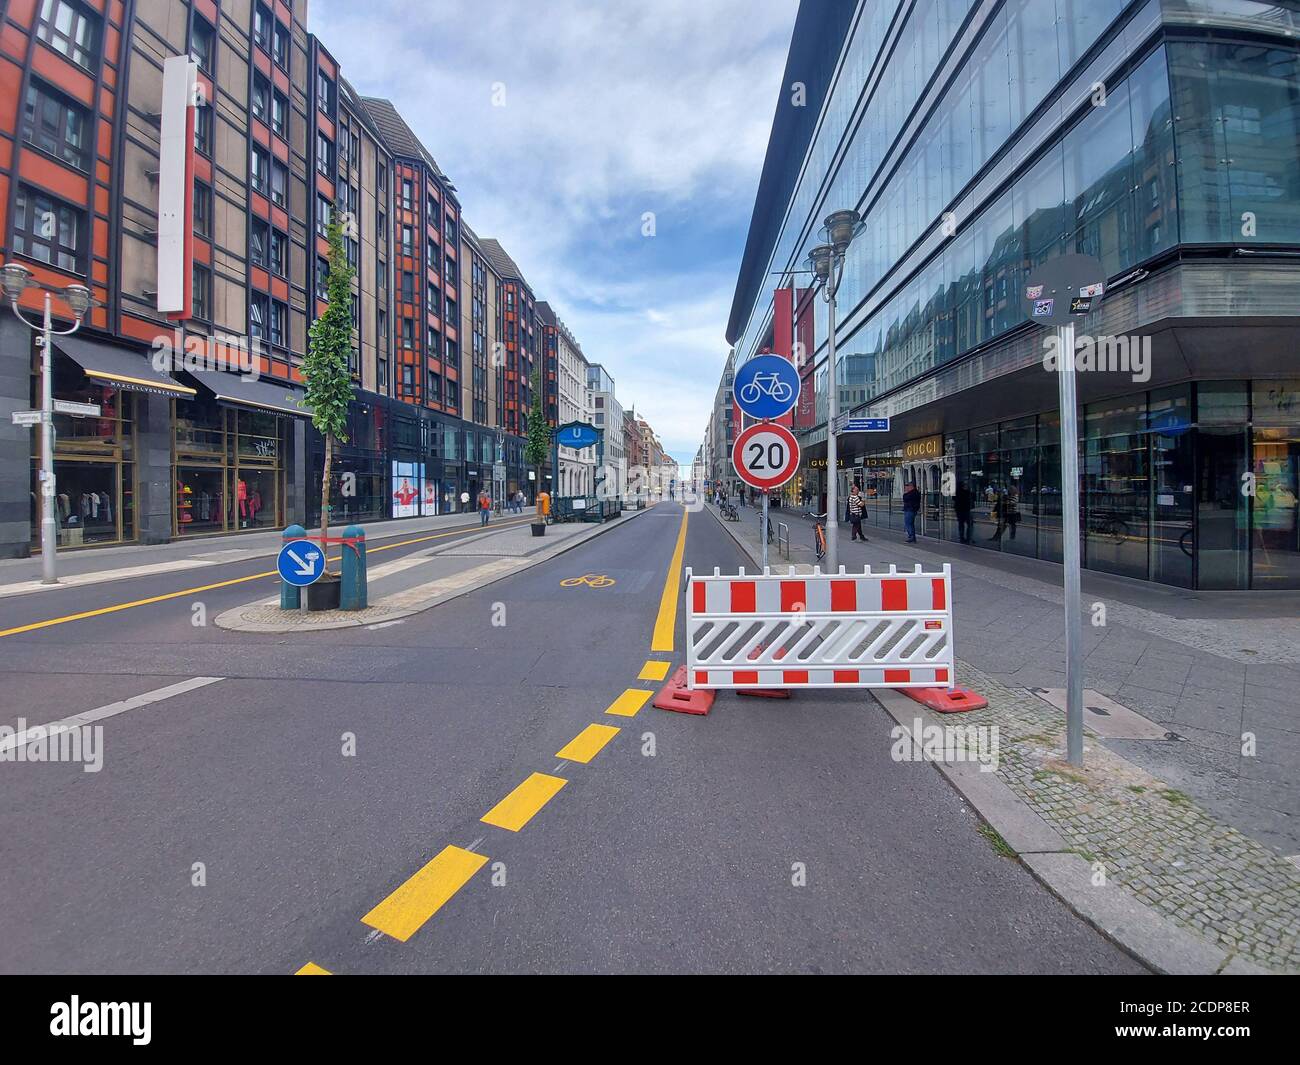 FriedrichstraSe (Friedrichstrasse) street in Berlin, Germany, on August 29, 2020. Until the end of January 2021, about half-kilometer section of one of the most famous streets in Berlin will be reserved exclusively for pedestrians and cyclists. The city wants to verify the extent to which this measure will increase the quality of life in public space. (CTK Photo/Ales Zapotocky) Stock Photo